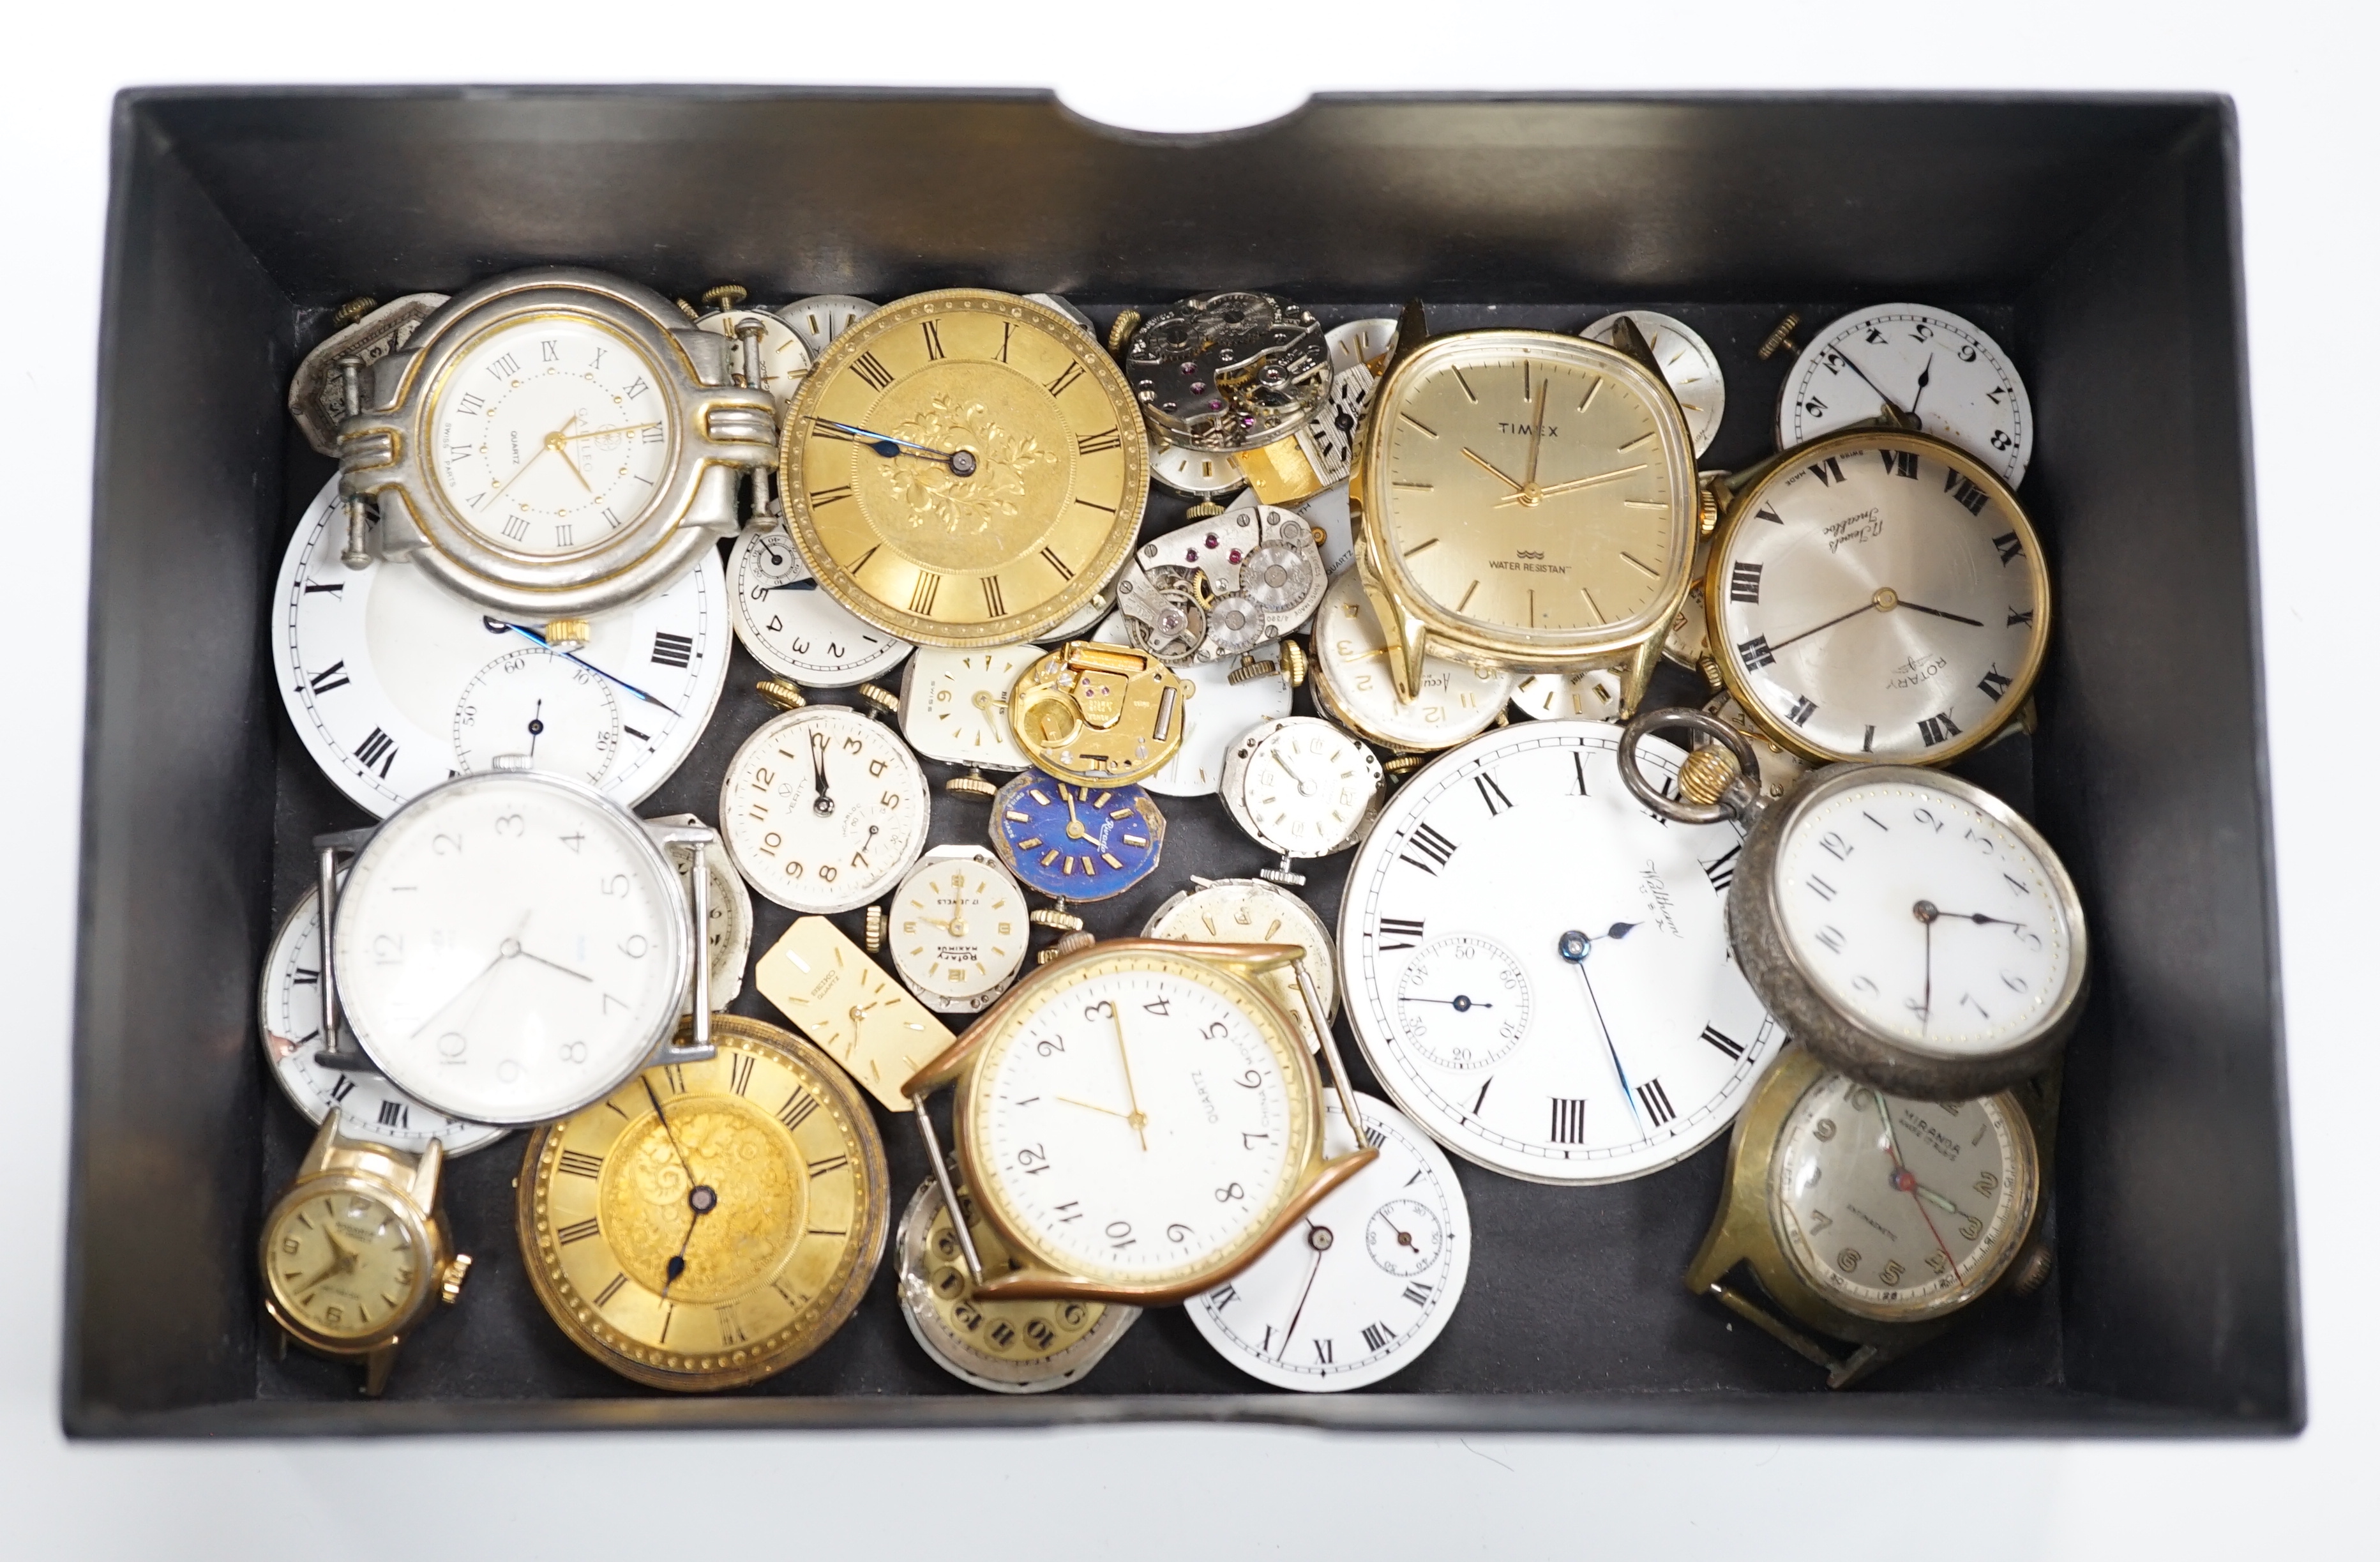 Assorted wrist wand pocket watch movements including Waltham and Rotary and a Swiss 935 standard fob watch.